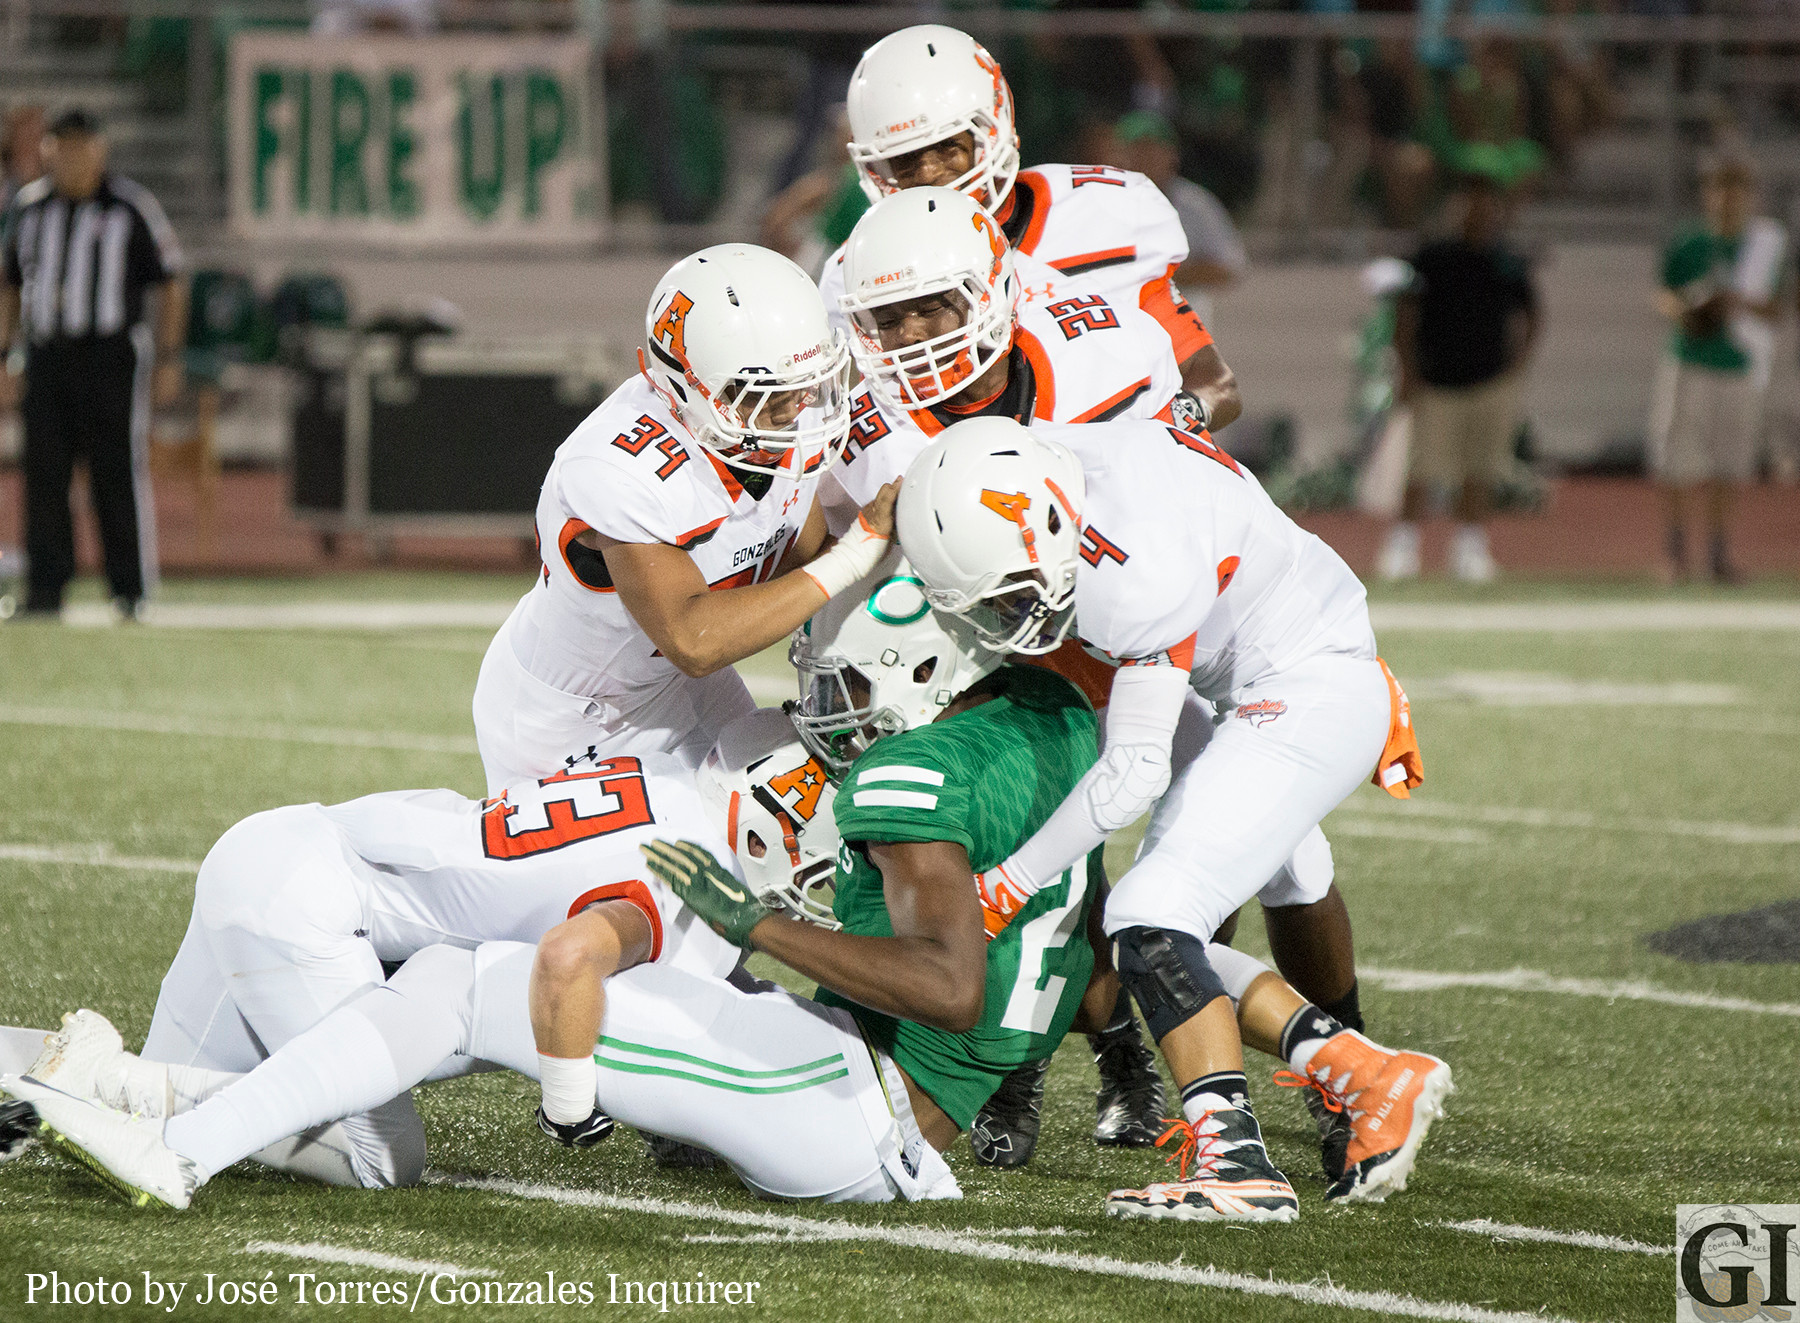 The Apaches defense swarmed Cuero runners in their 60-21 loss Friday night.